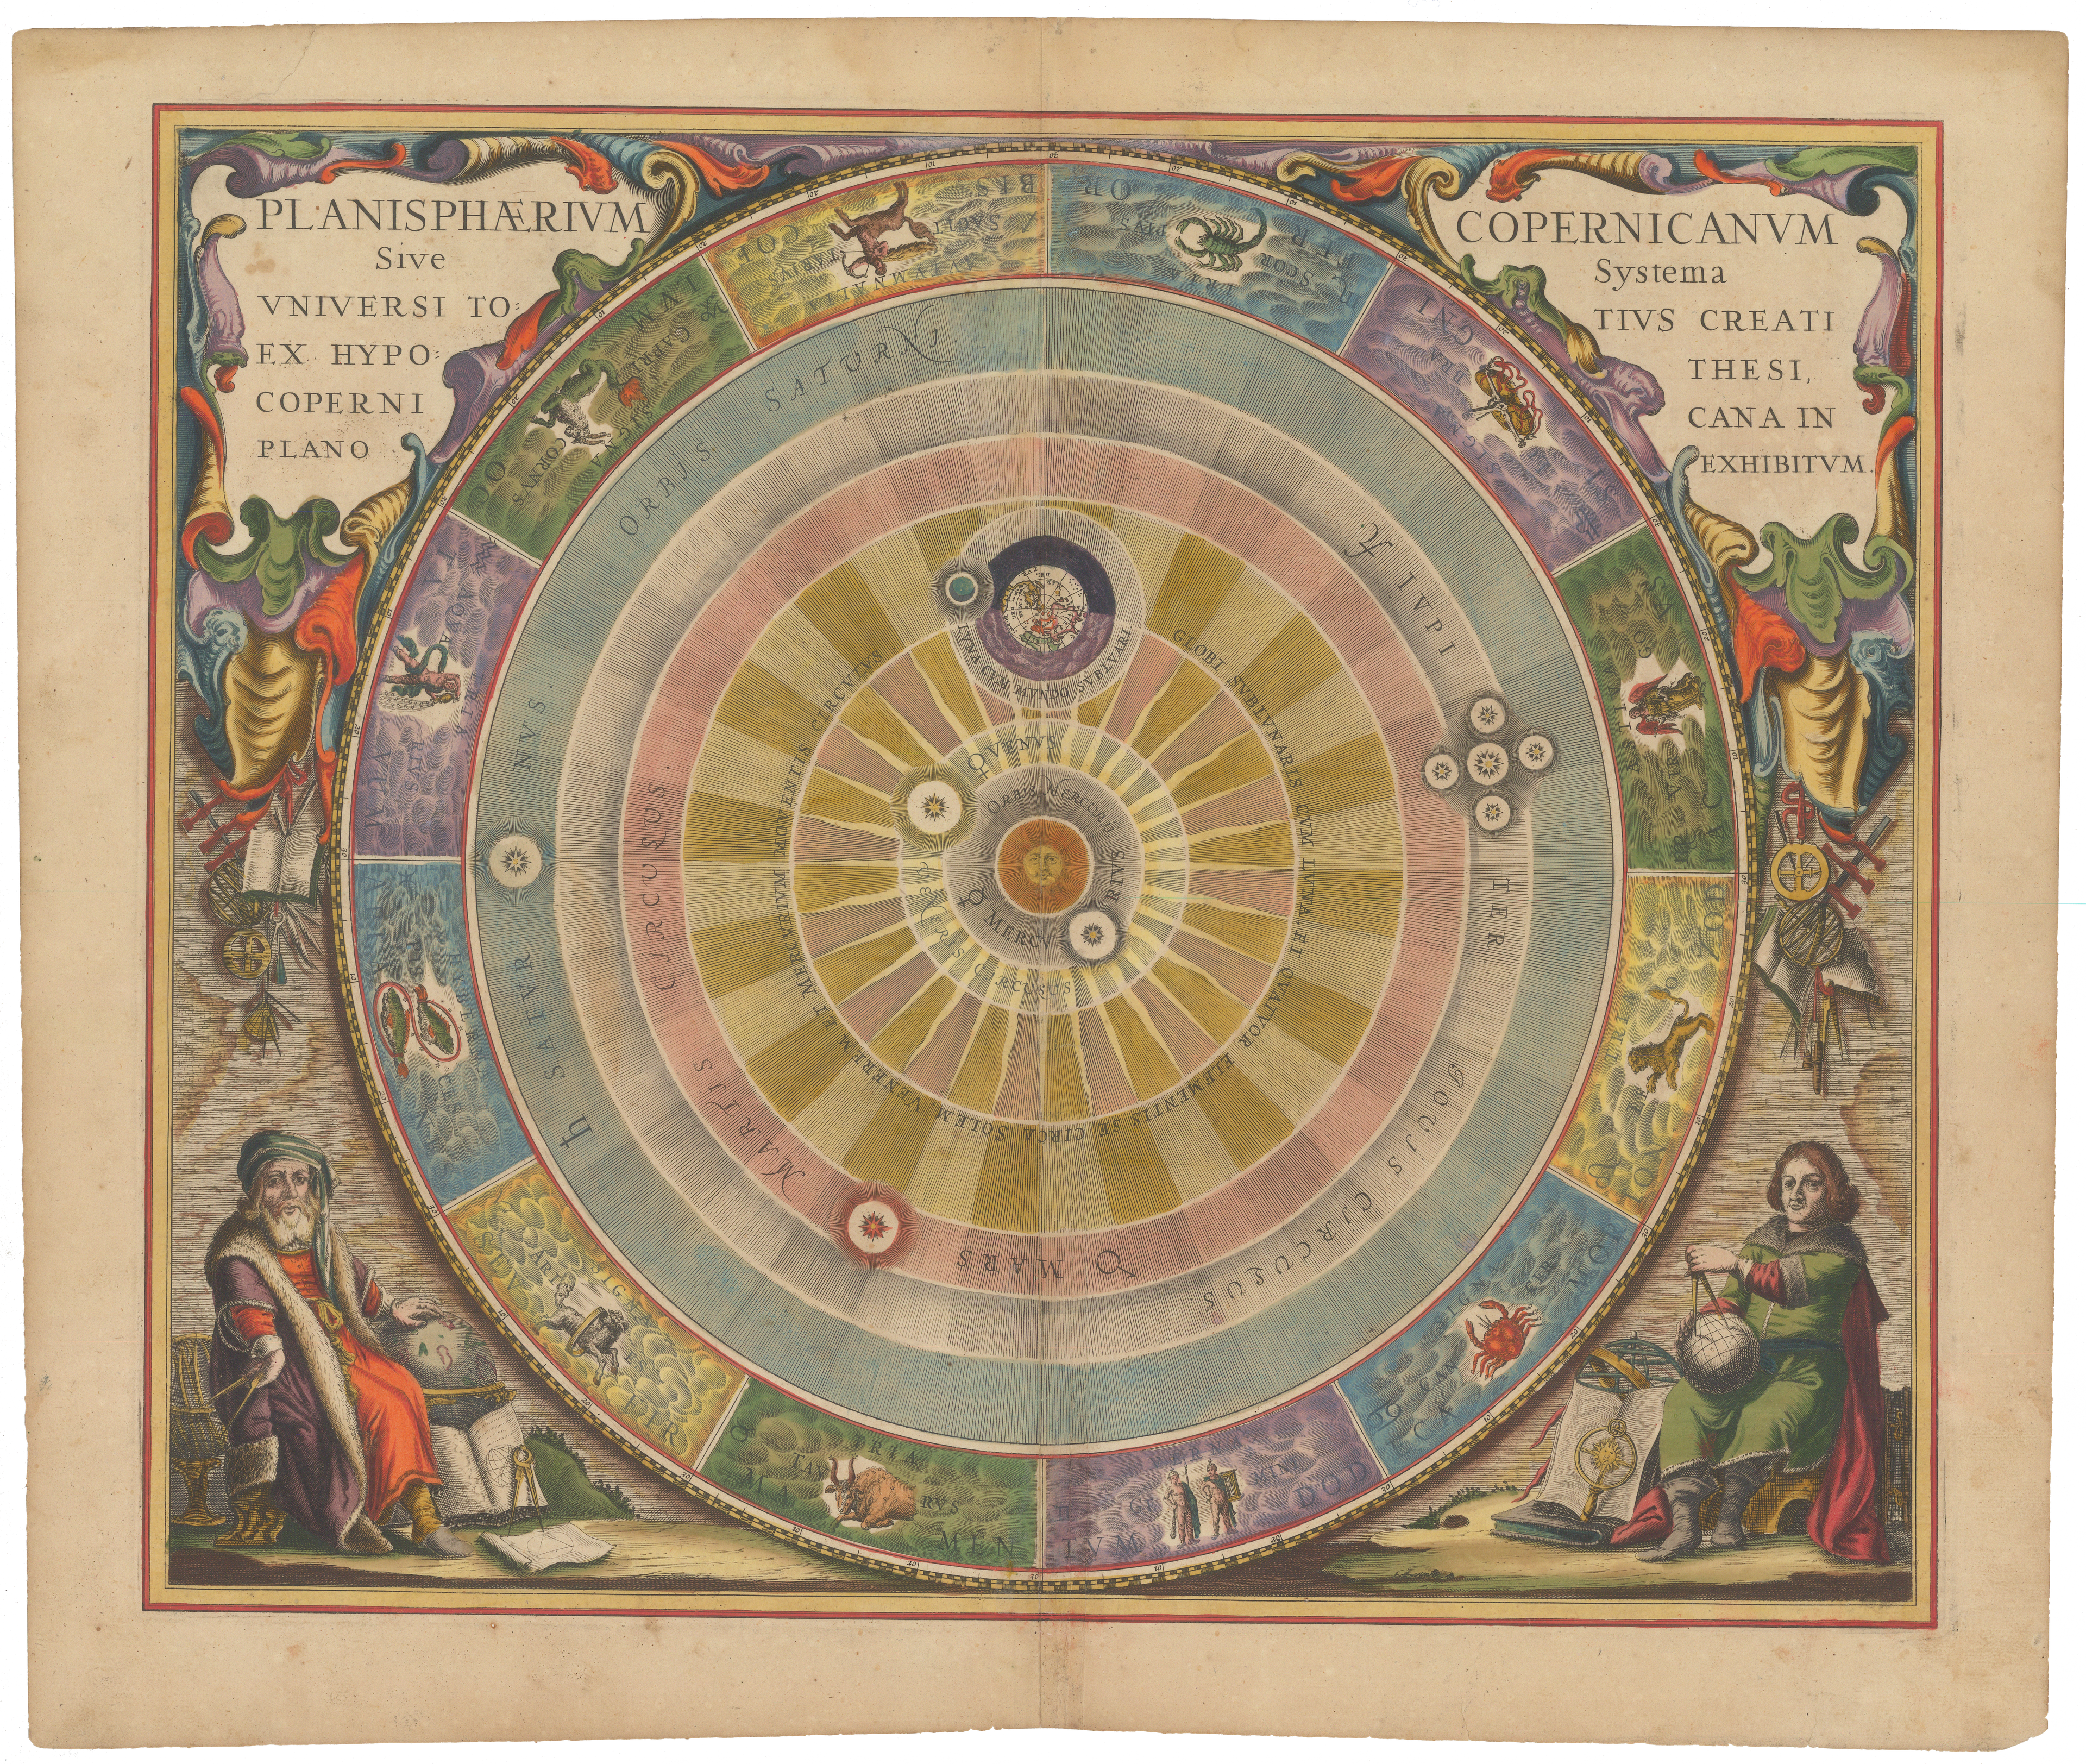 A planisphere showing the heavens and the sun according to the Copernican system.